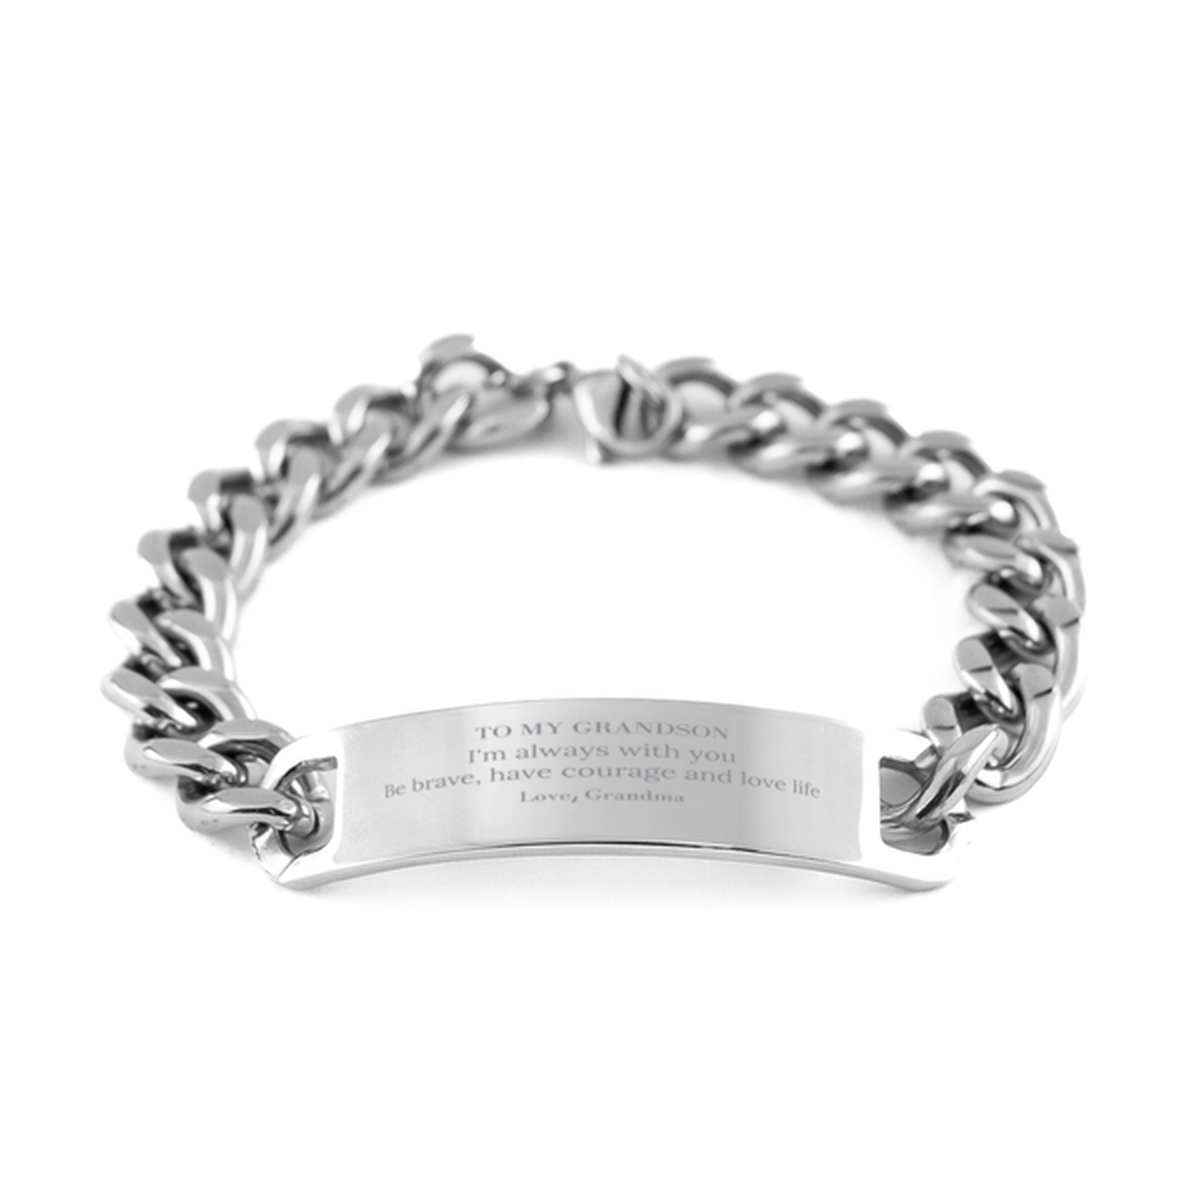 To My Grandson Gifts from Grandma, Unique Cuban Chain Stainless Steel Bracelet Inspirational Christmas Birthday Graduation Gifts for Grandson I'm always with you. Be brave, have courage and love life. Love, Grandma